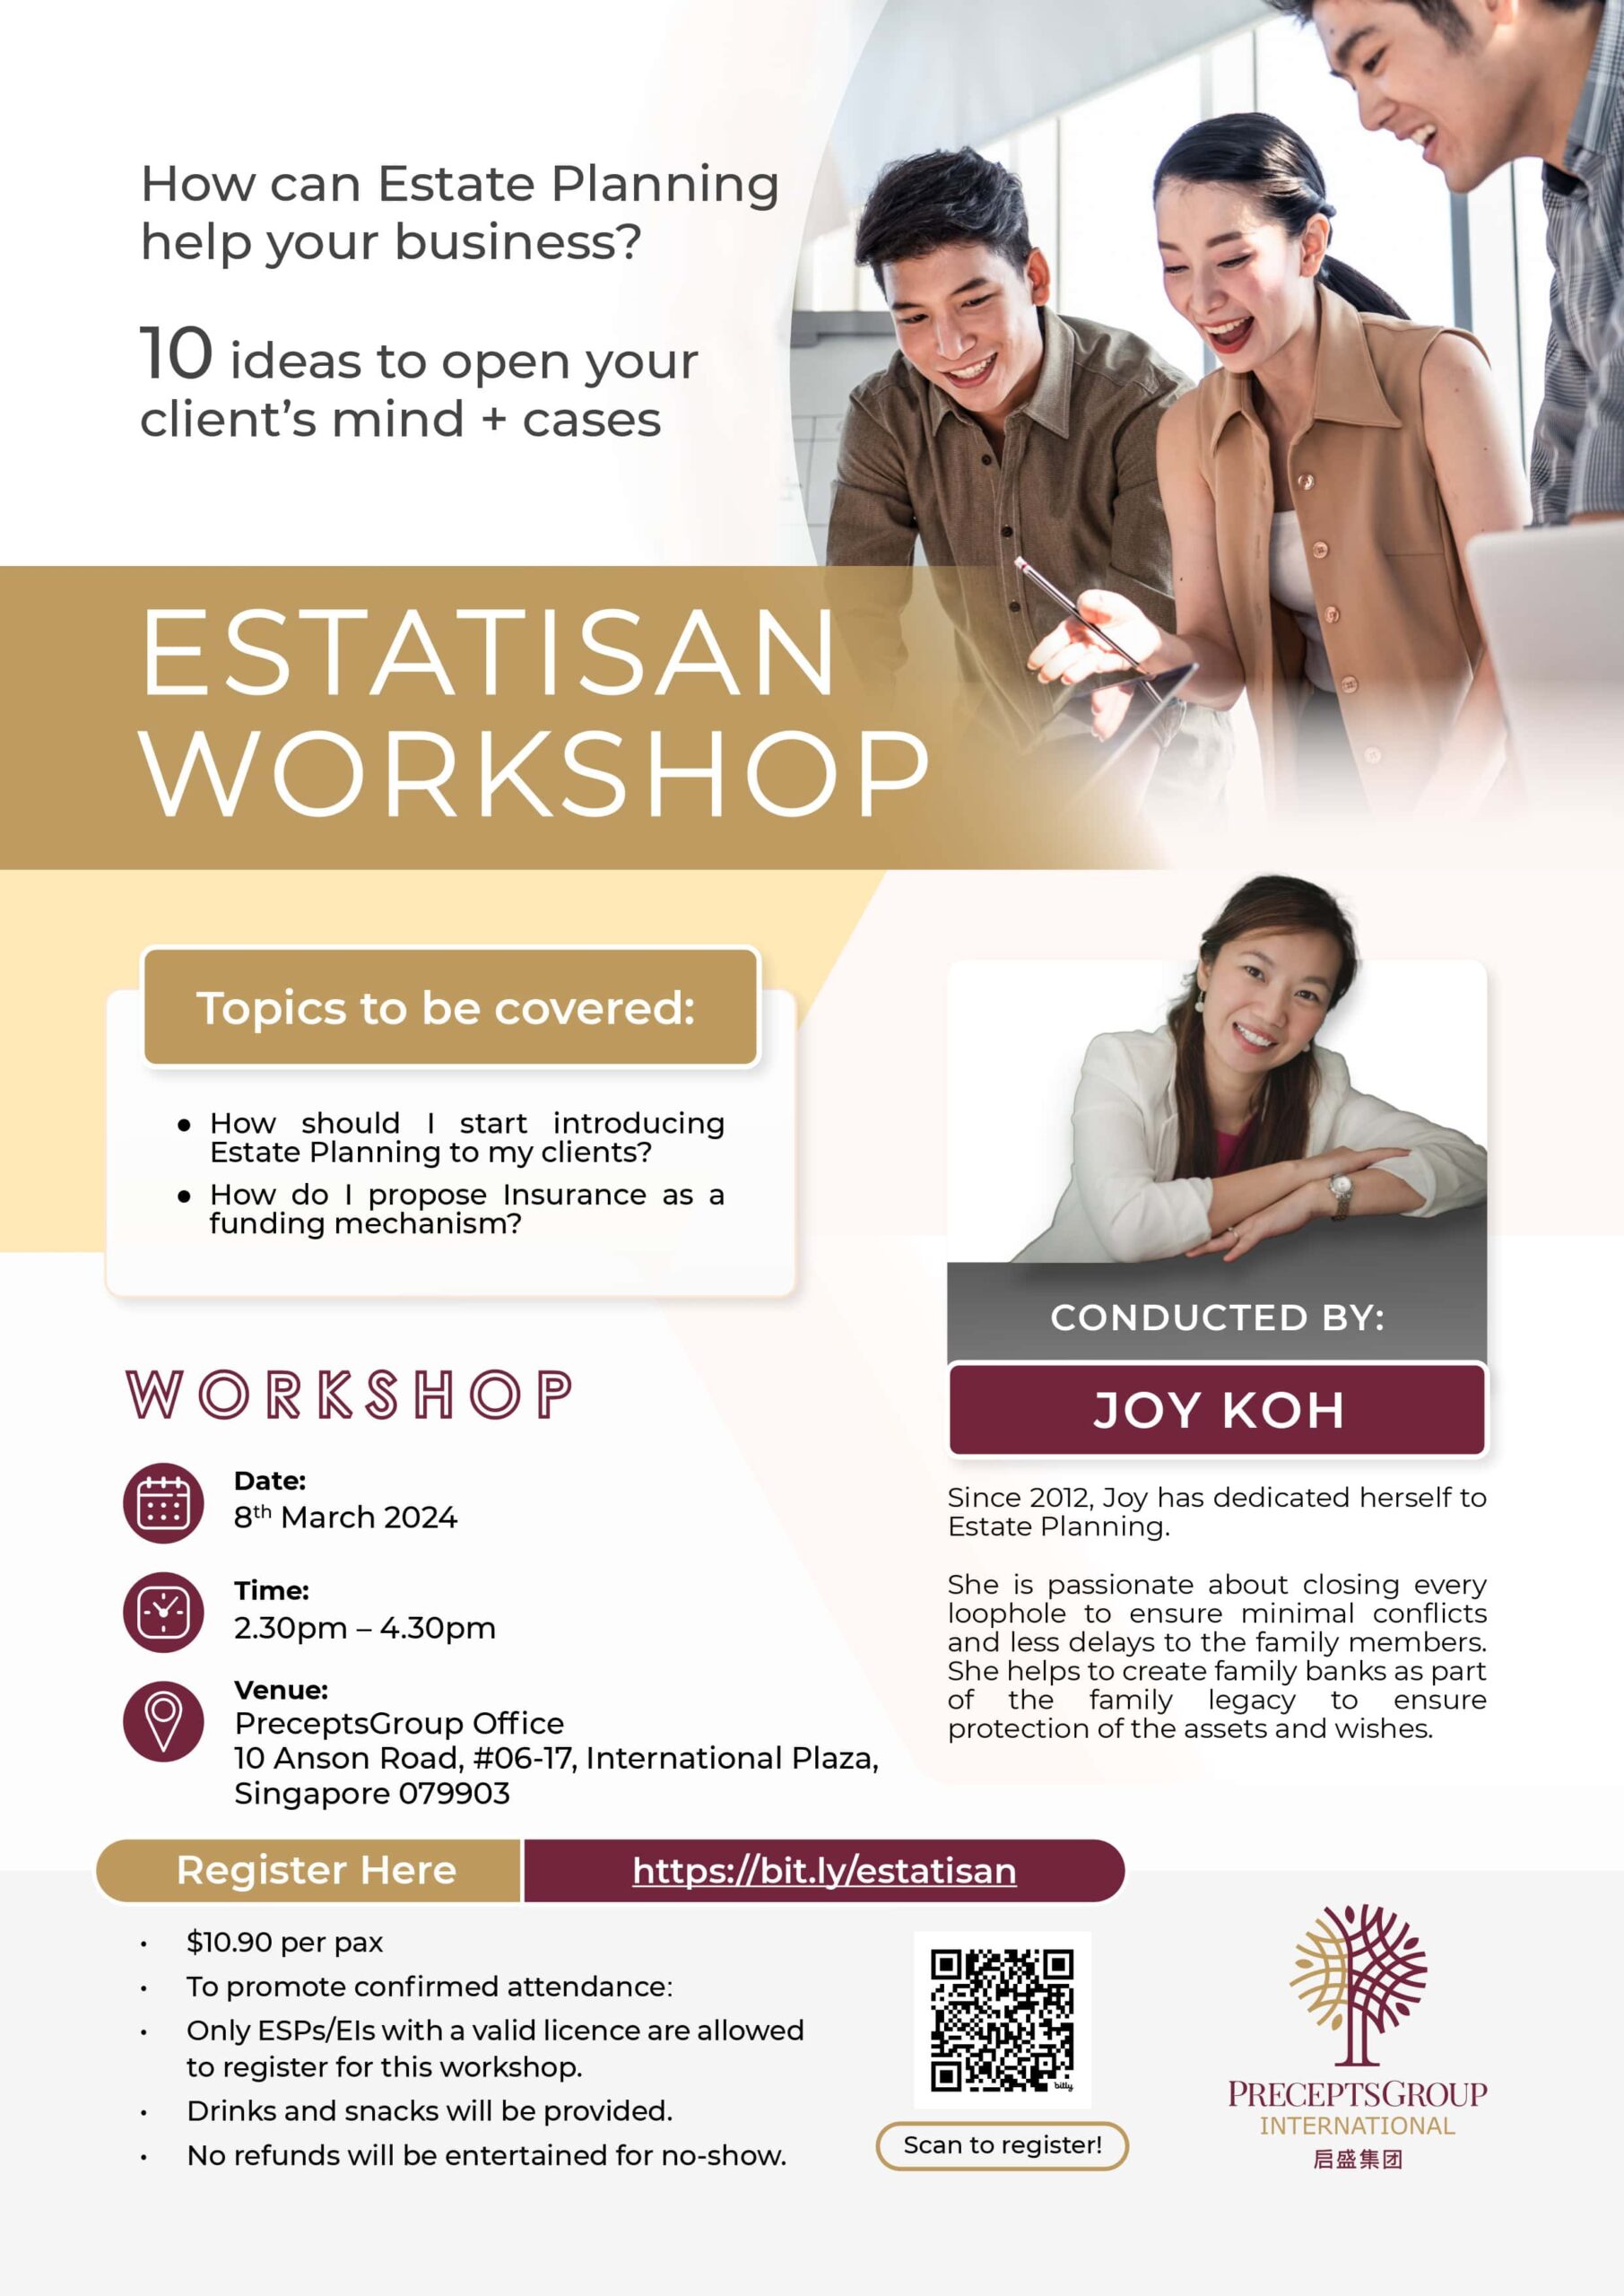 Join our interactive estate planning *seminar*. The workshop covers essential topics and fresh *ideas*, with details about the event, organizer’s info, and a registration link. Don't miss an insightful session with our expert speaker, Joy Koh.